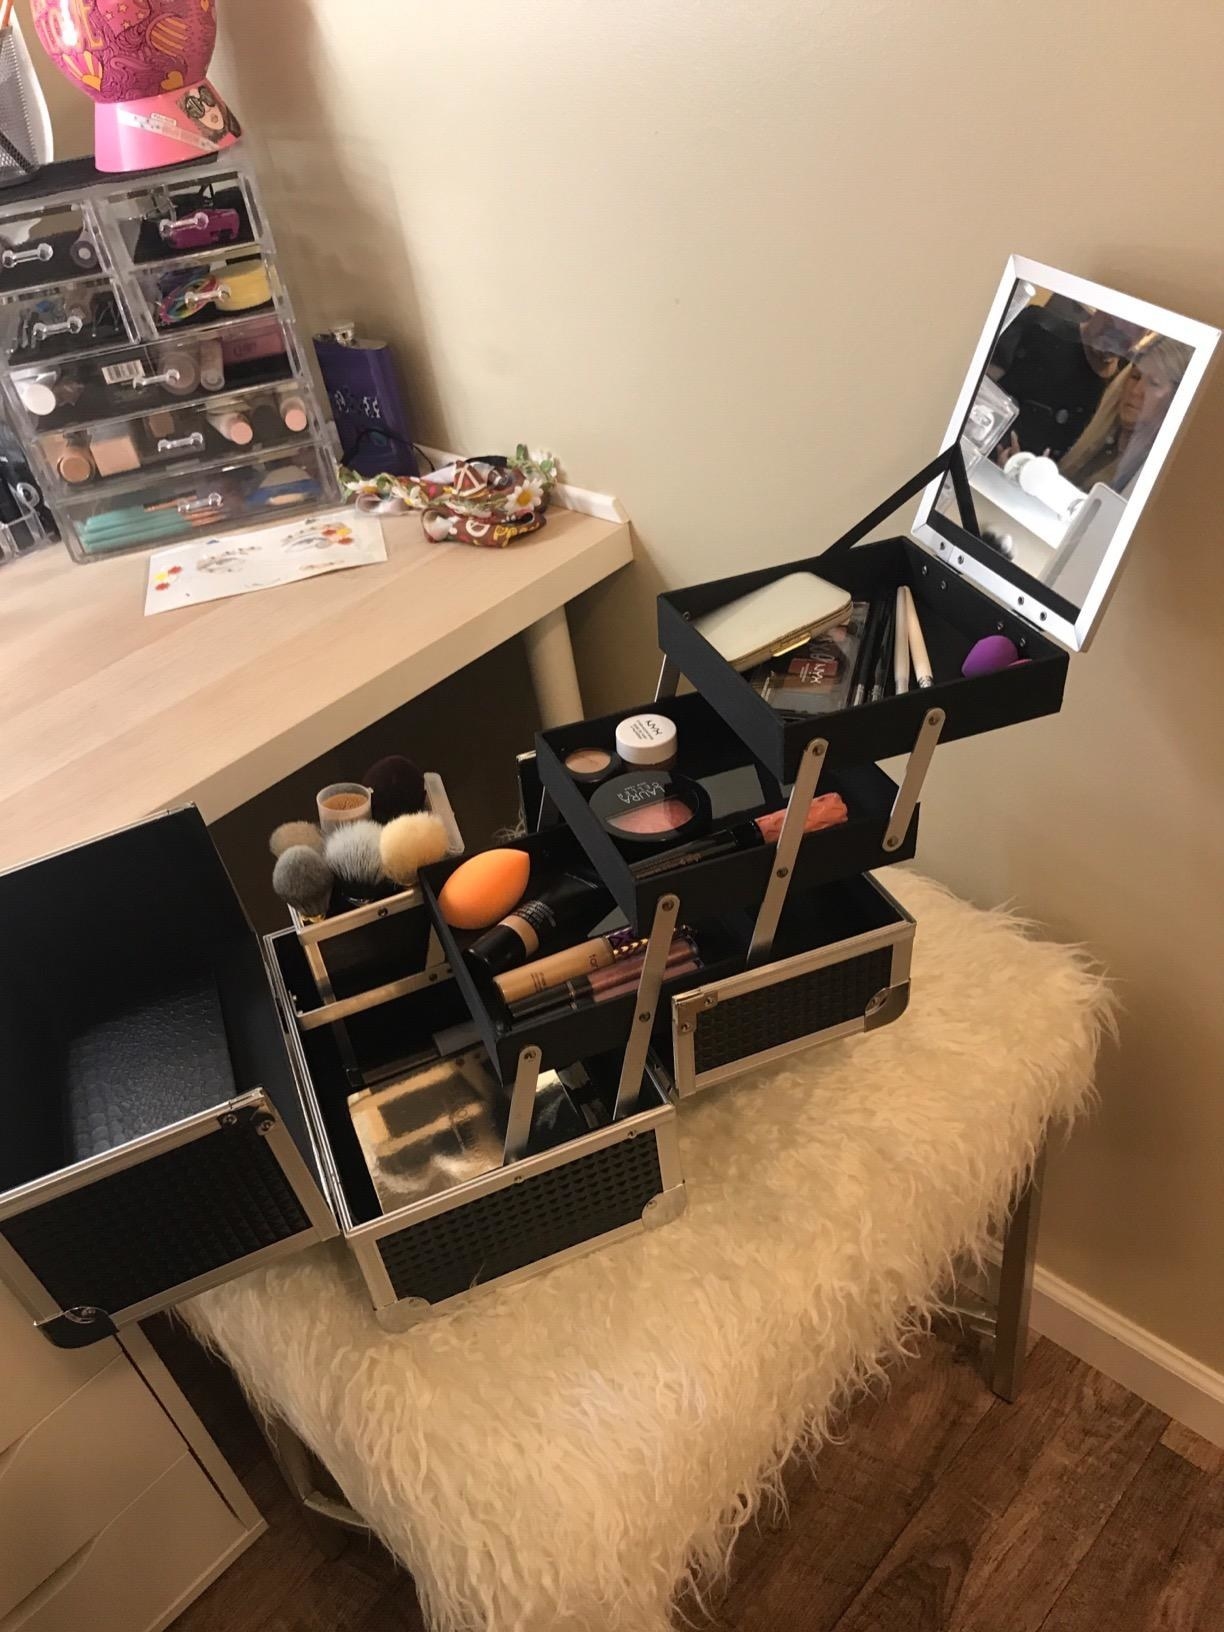 The box, expanded and full of makeup